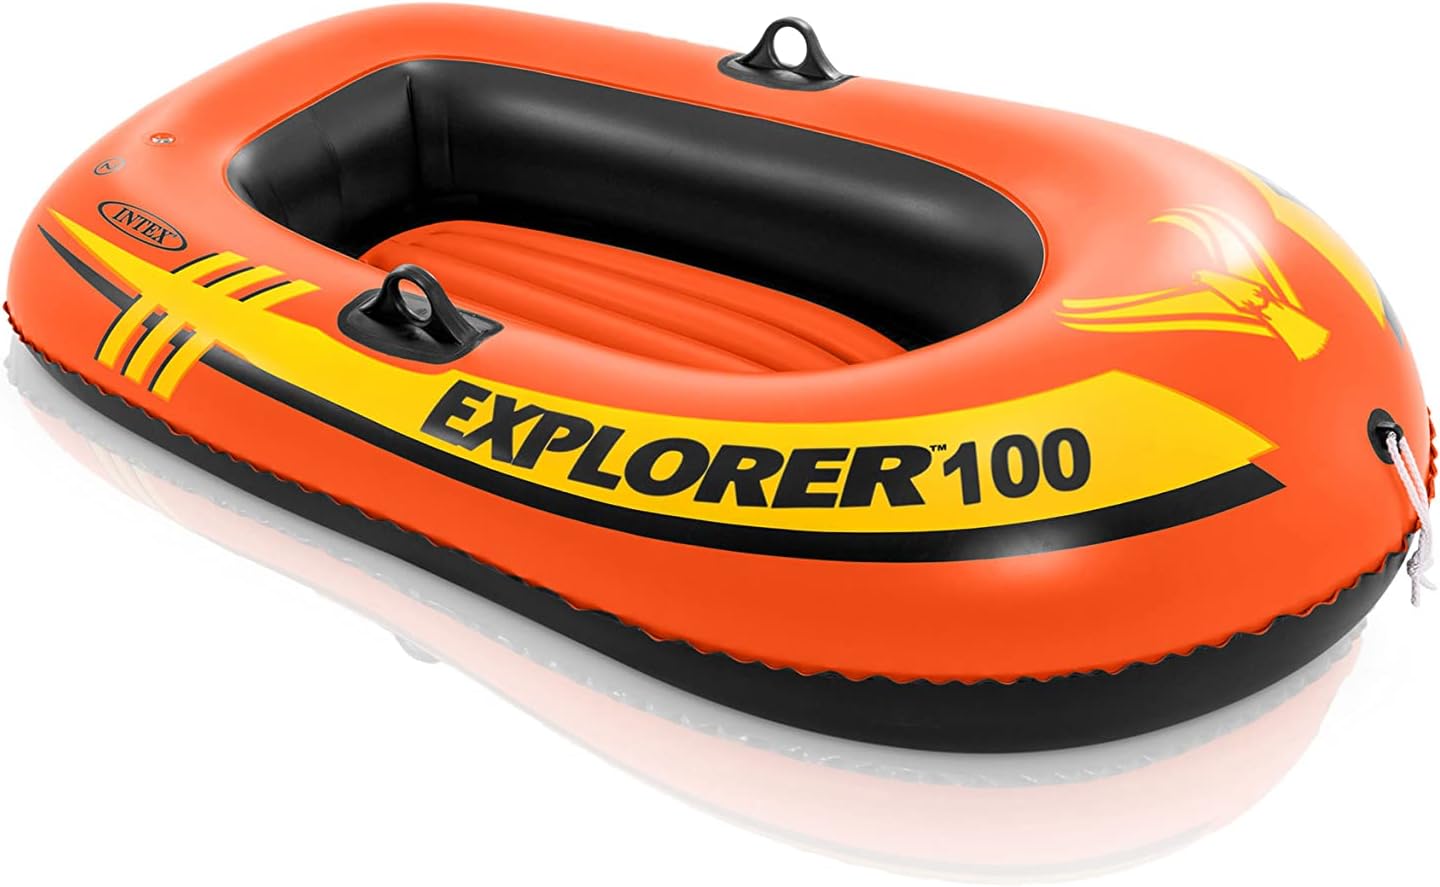 Prime Members: 2-Person Intex Explorer Inflatable Boat $11.17 + Free Shipping